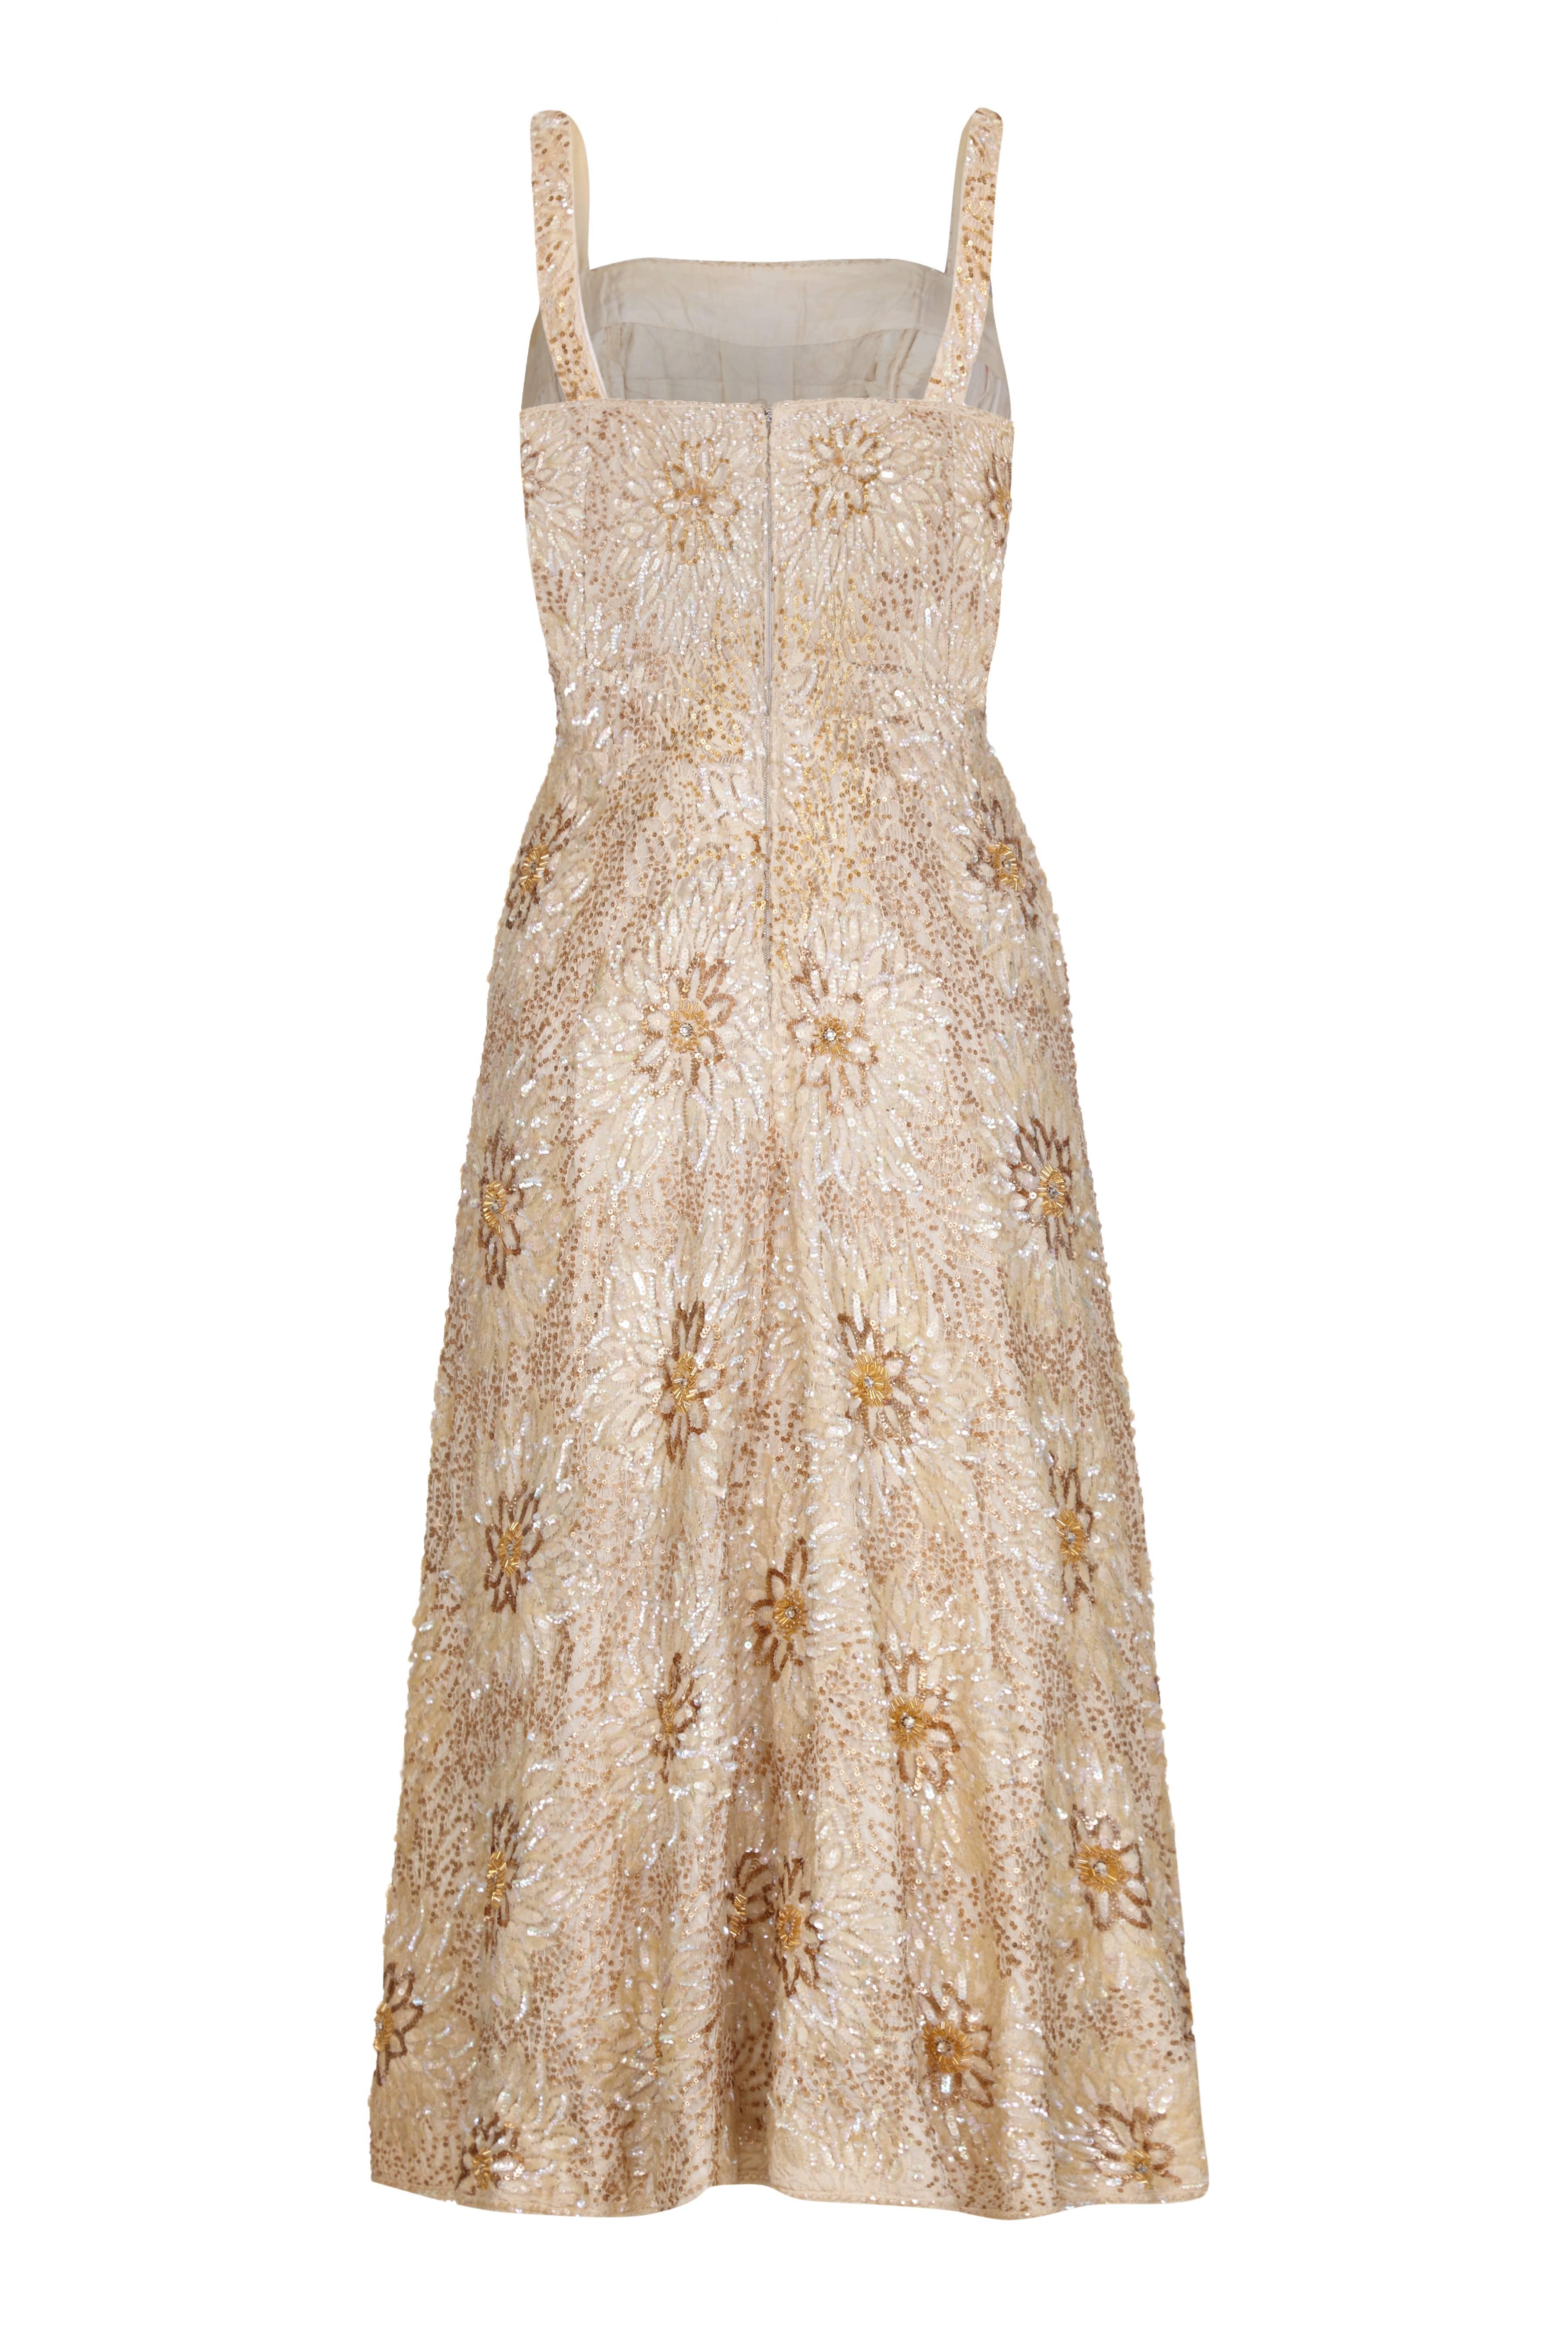 Gorgeous vintage 1950s party/ cocktail dress from Pouponne Couture of Monte Carlo.  This lovely hand beaded, couture piece is fully sequined and beaded in large floral motifs in tones of gold and cream. It features thin straps, a boned bodice with